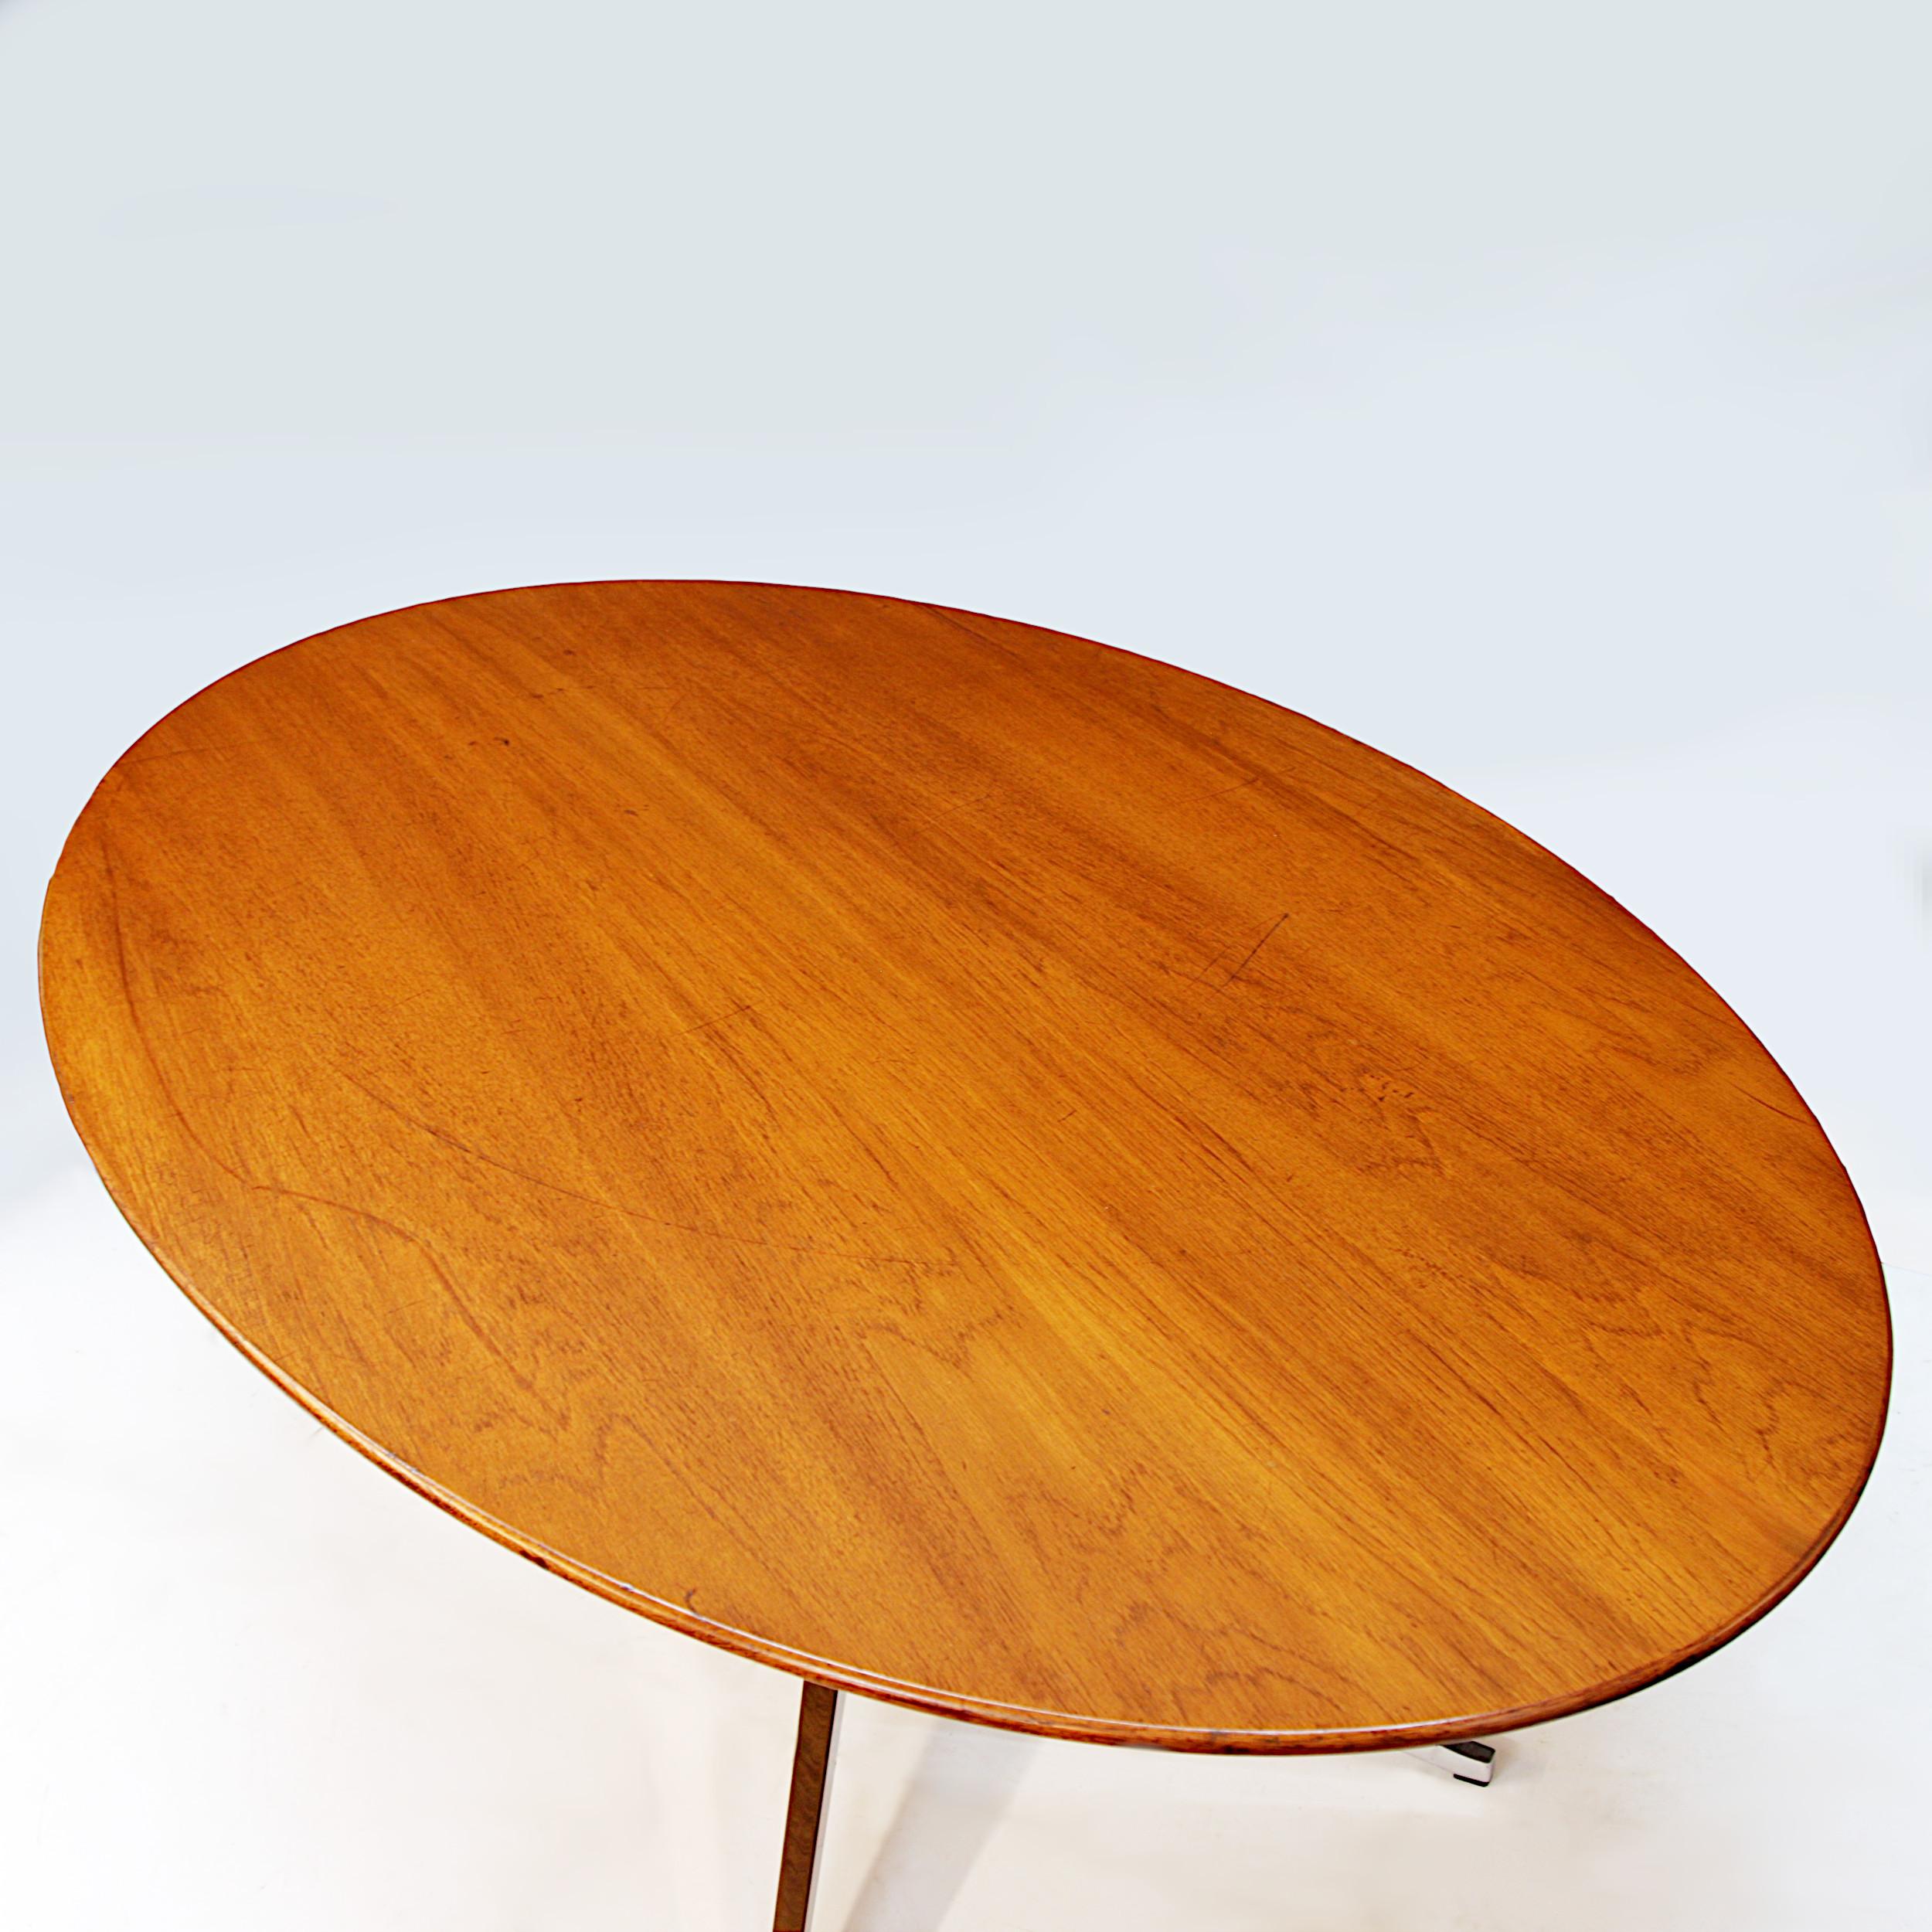 American 1960s Mid-Century Modern Oval Oak Dining Conference Table Desk by Florence Knoll